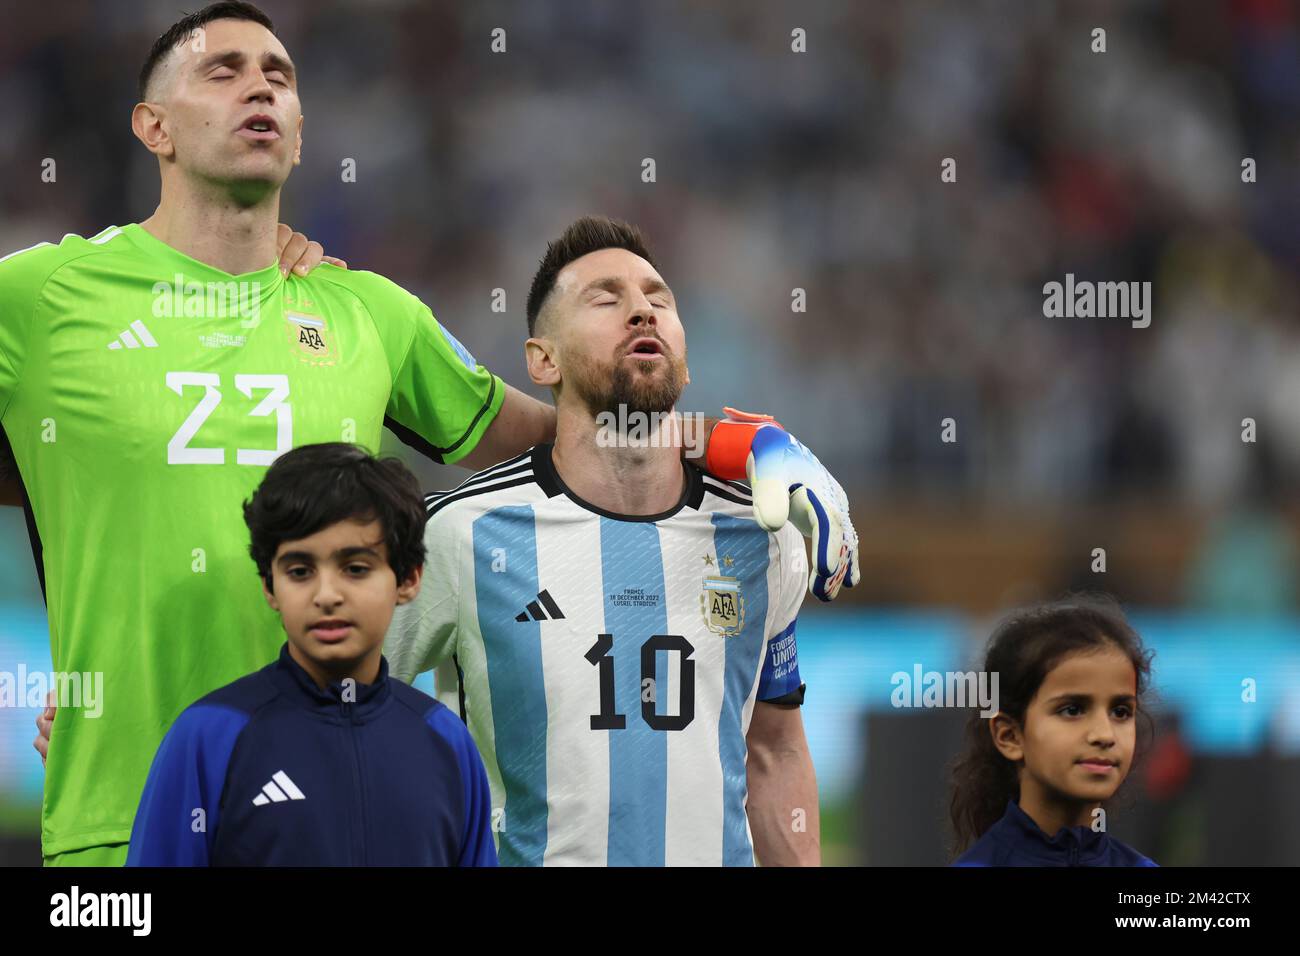 Lusail, Qatar. 18th Dec, 2022. Lionel Messi (2nd R) and Emiliano Martinez (1st L) of Argentina sing national anthem prior to the Final between Argentina and France at the 2022 FIFA World Cup at Lusail Stadium in Lusail, Qatar, Dec. 18, 2022. Credit: Cao Can/Xinhua/Alamy Live News Credit: Xinhua/Alamy Live News/Alamy Live News Stock Photo